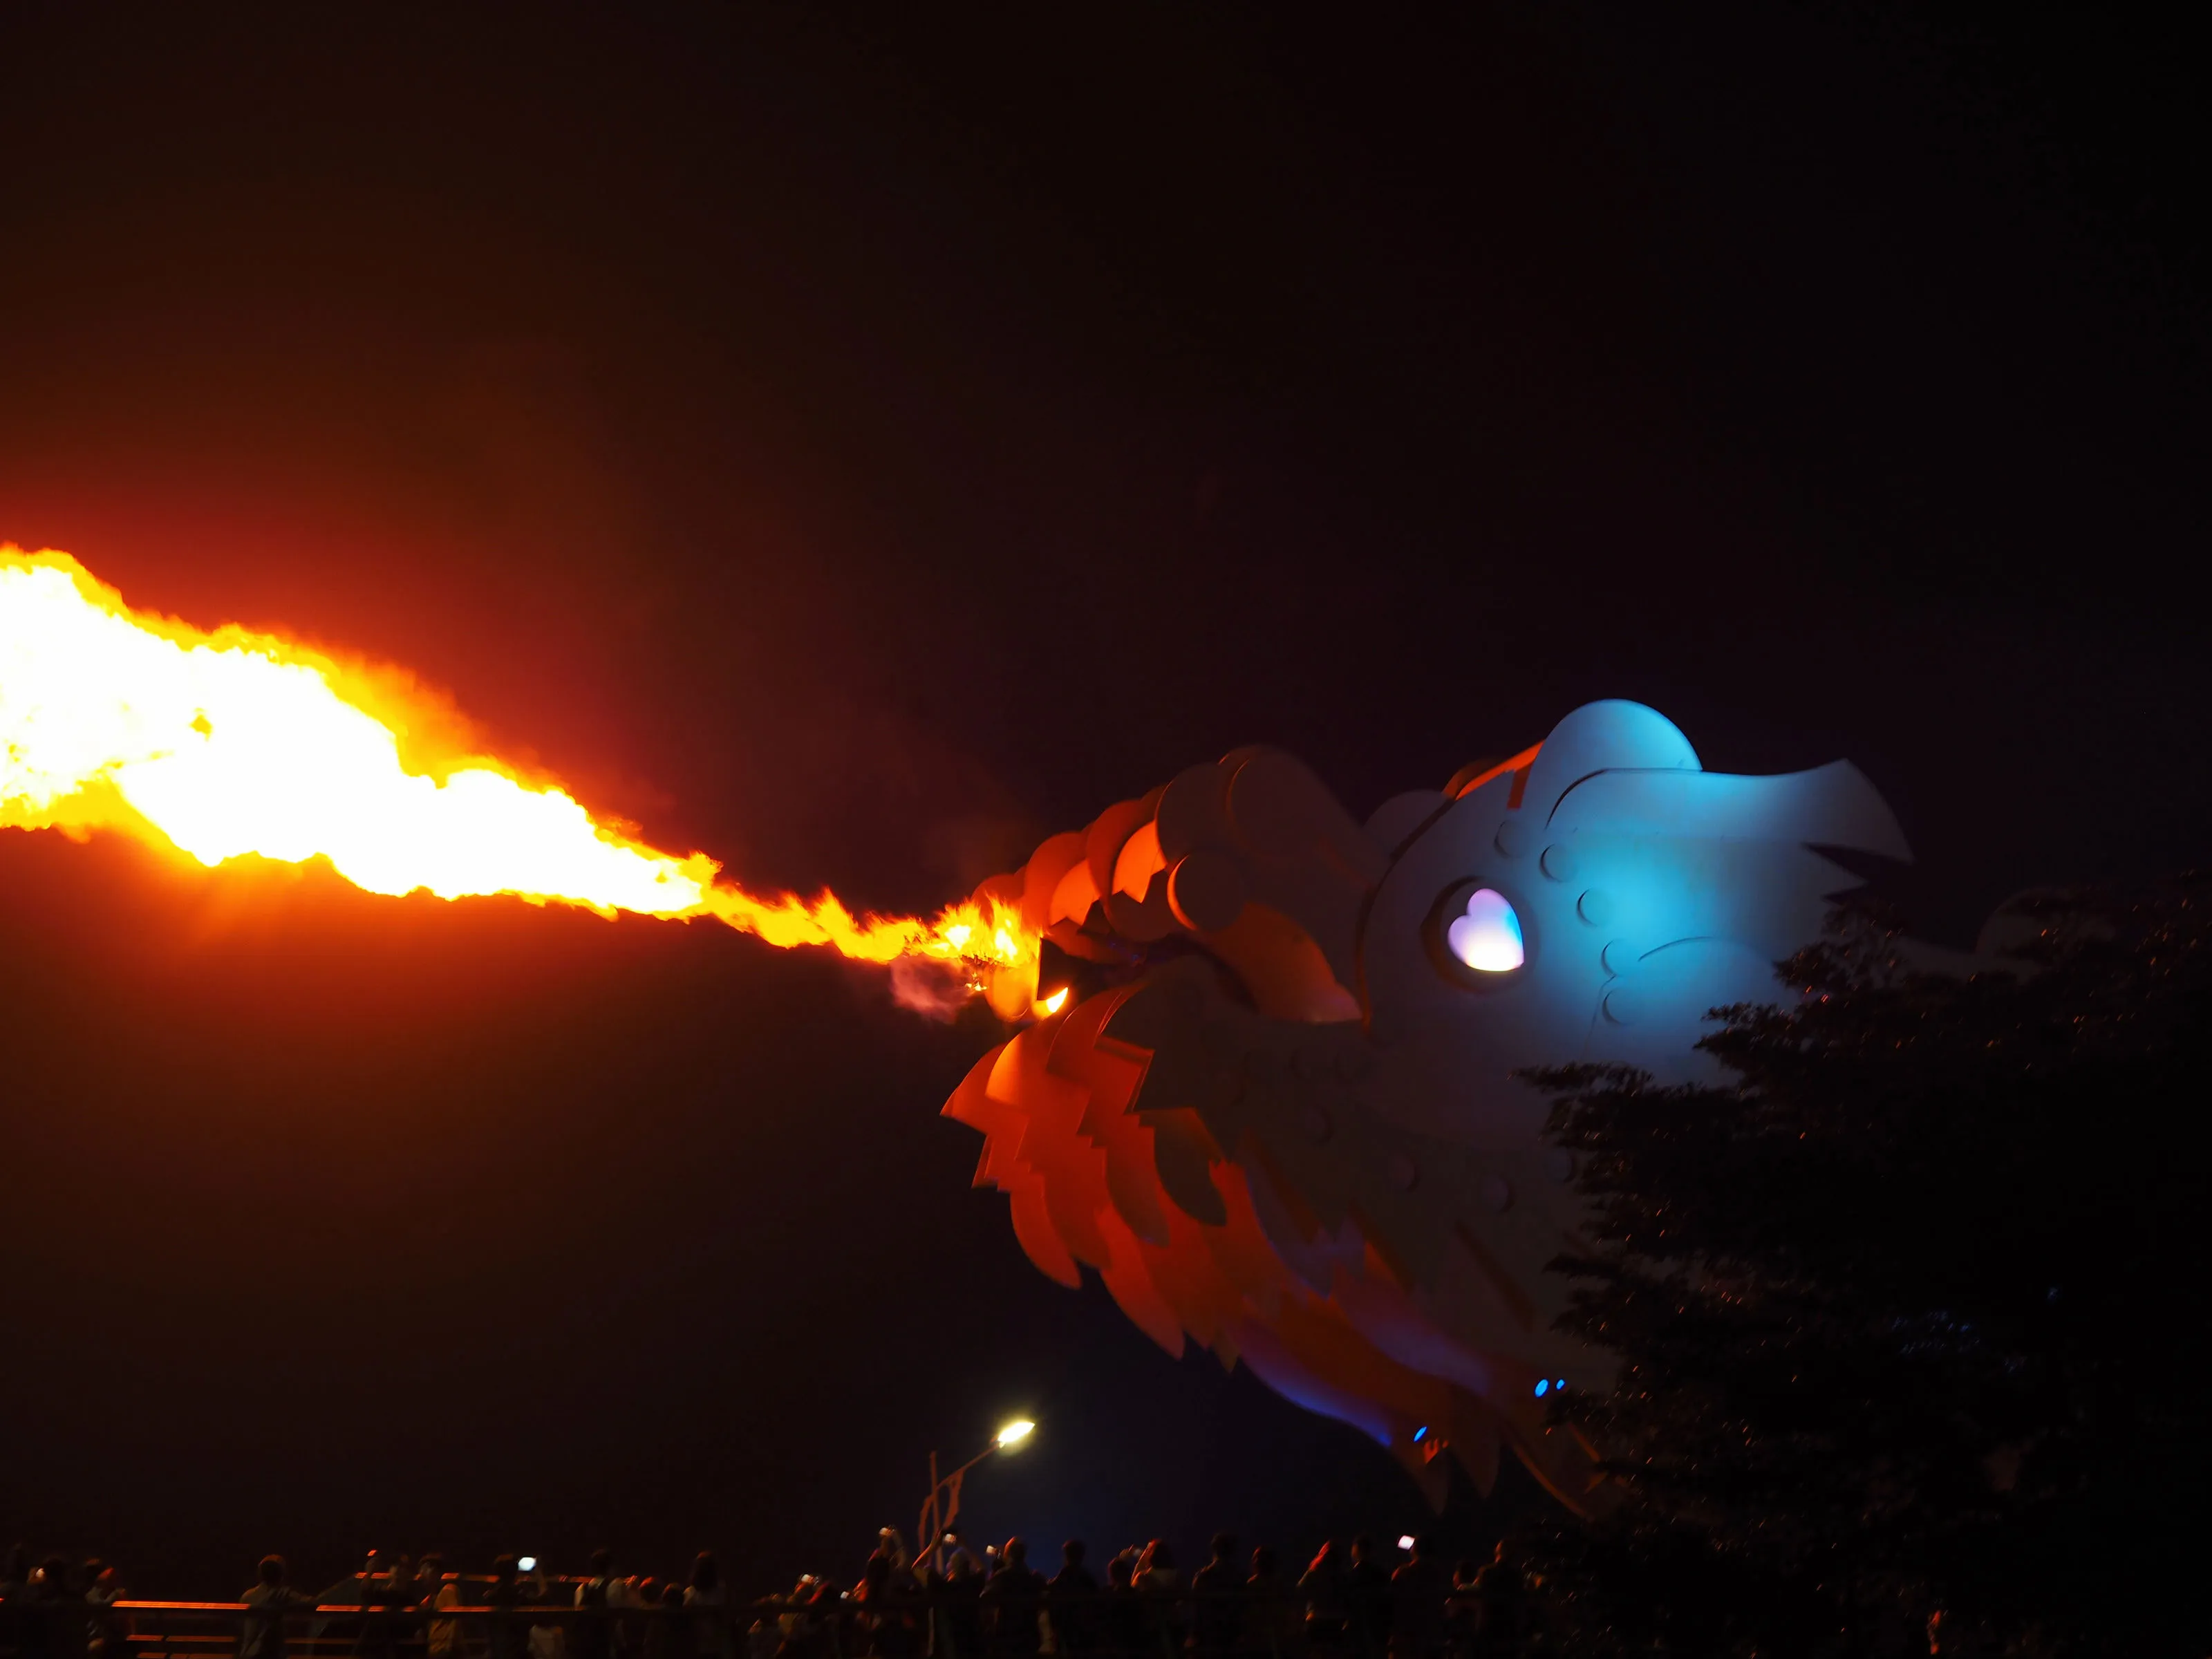 The fire spewing dragon might look like a theme park attraction, but it is actually a bridge.